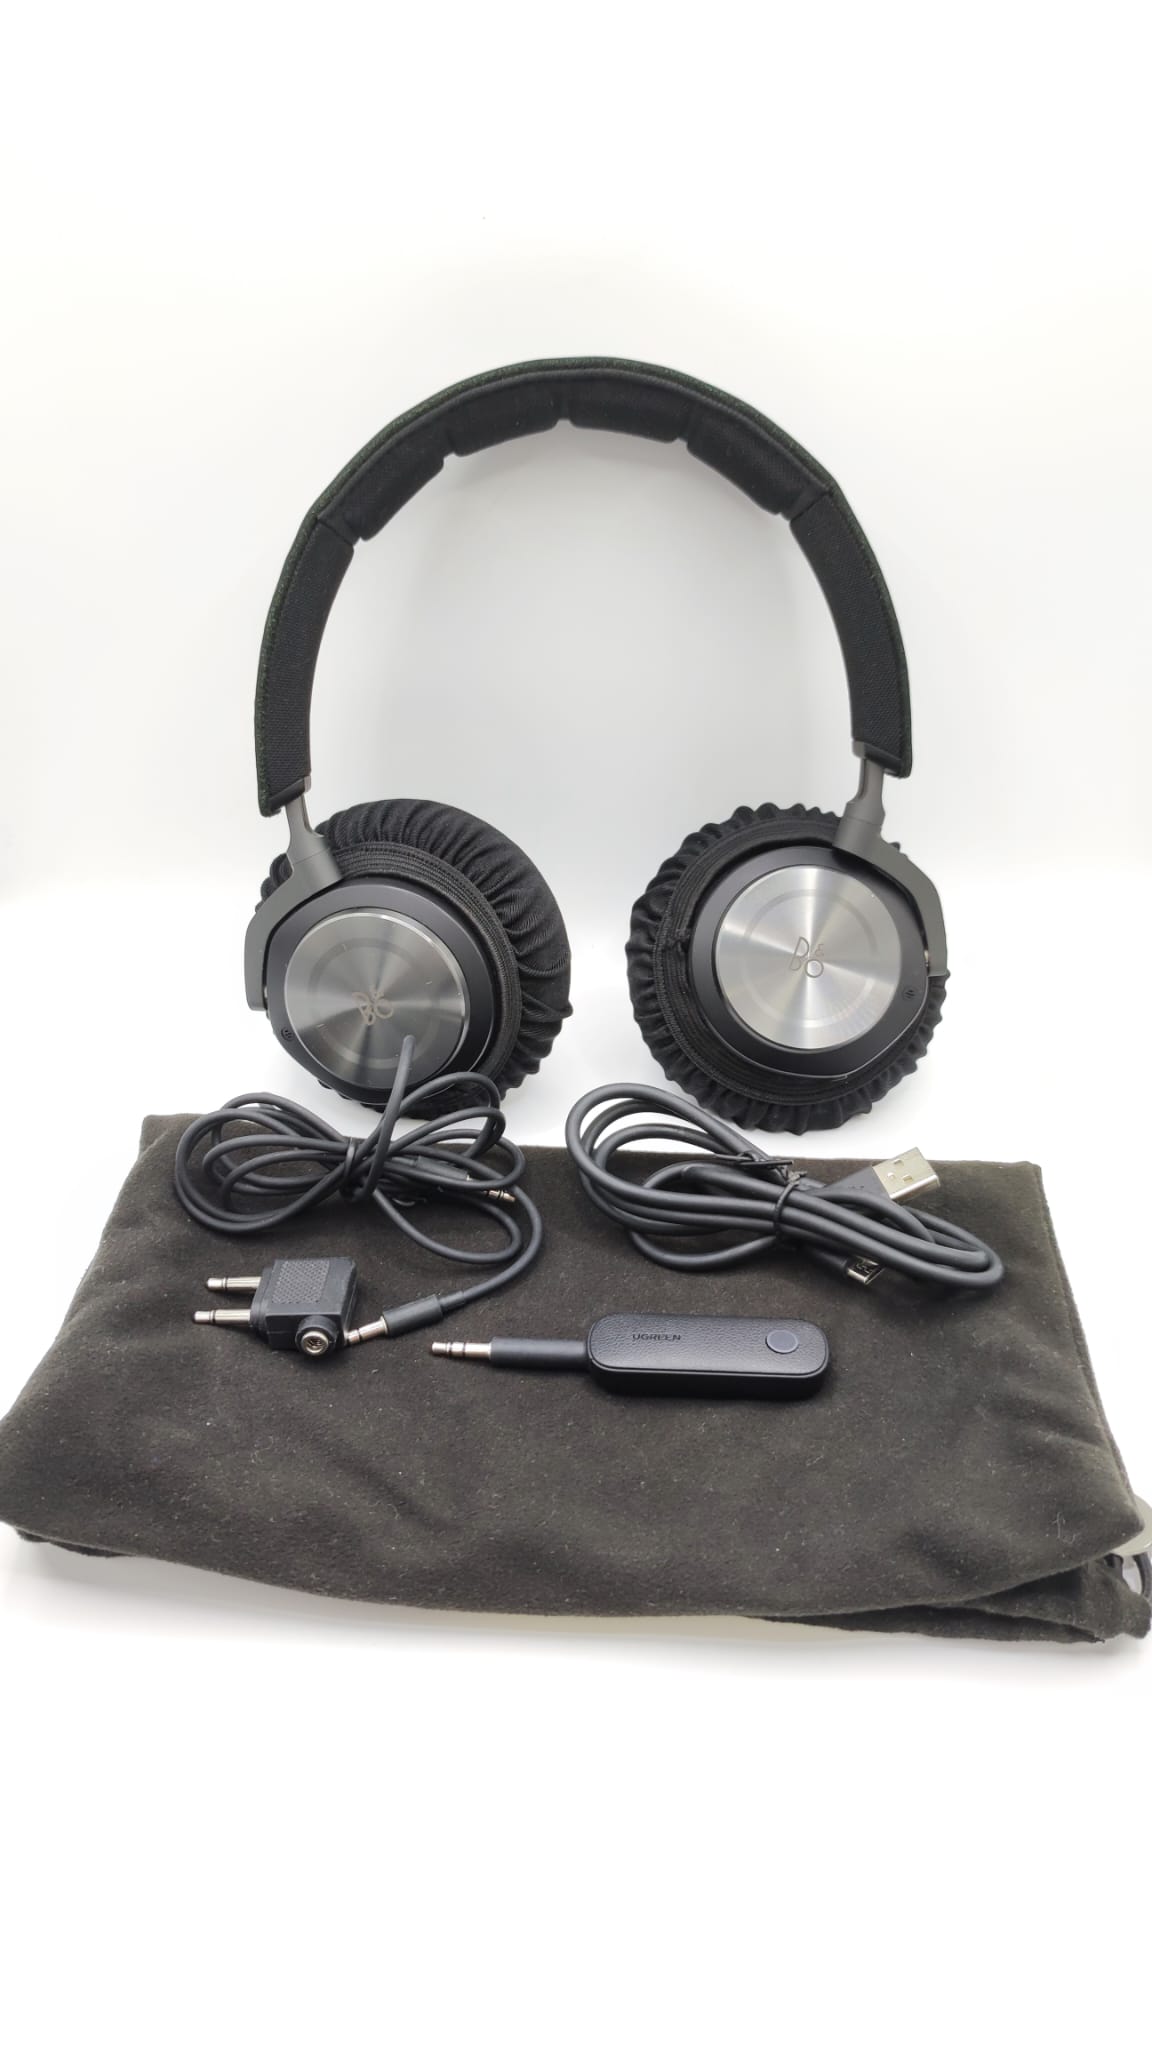 AURICULARES DIADEMA BLUETOOTH BANG Y OLUFSEN BEOPLAY H9 + ESTUCHE + CABLES  (9)